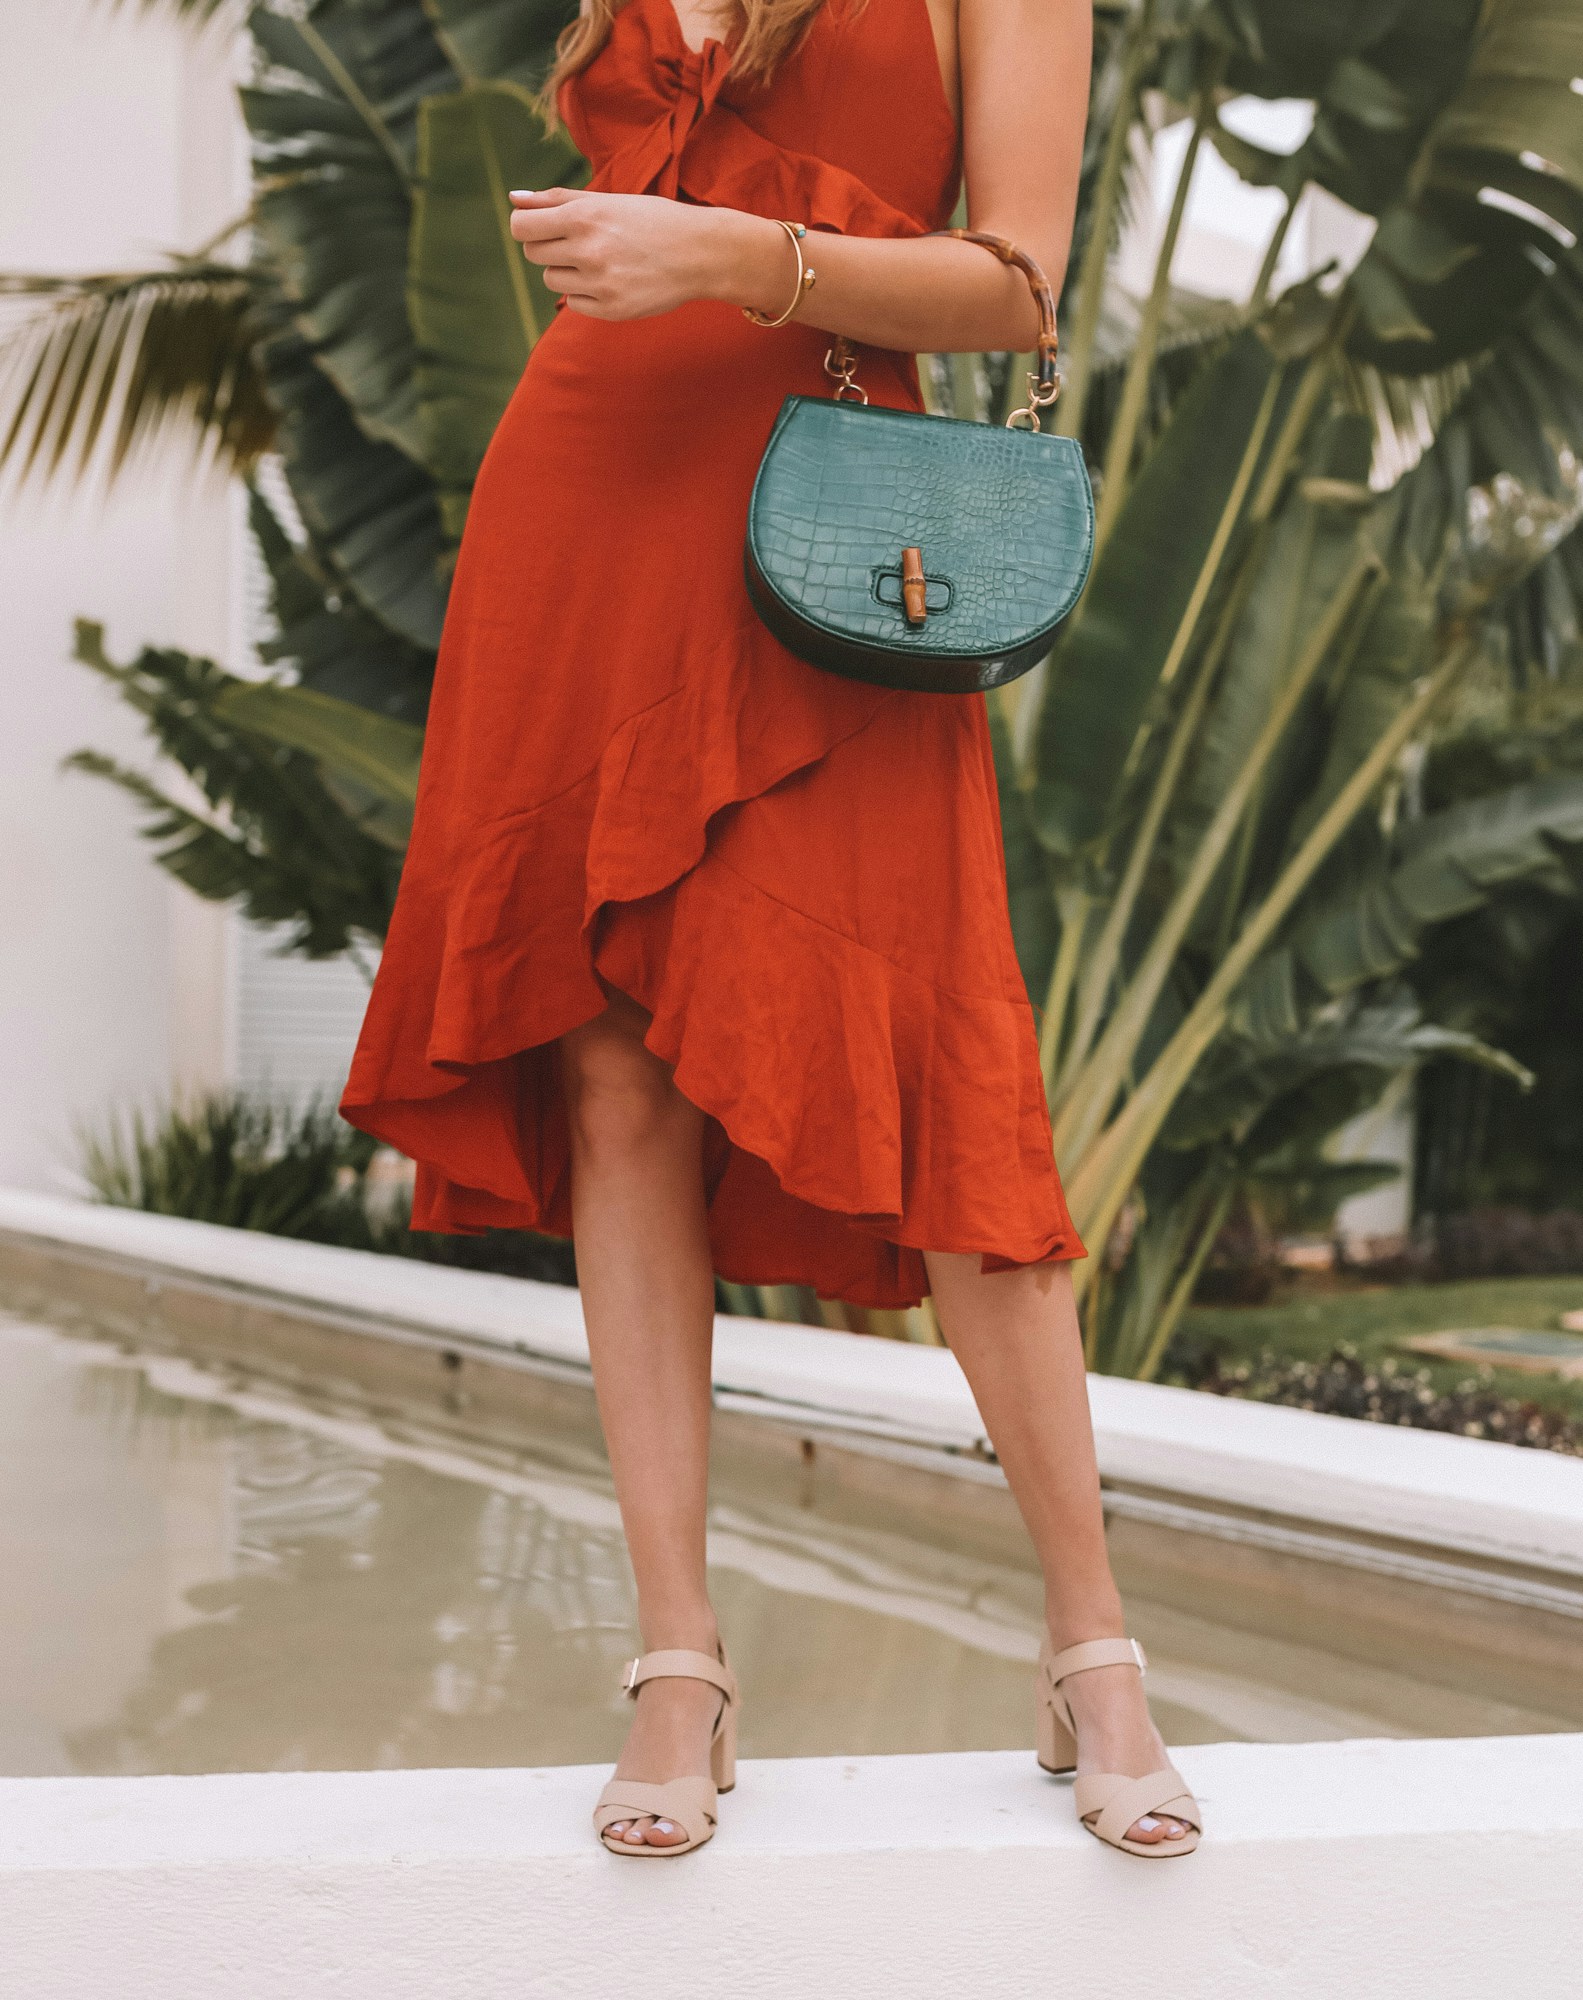 Forever 21 green faux croc bag with a bamboo handle, orange linen dress and cream leather sandals.